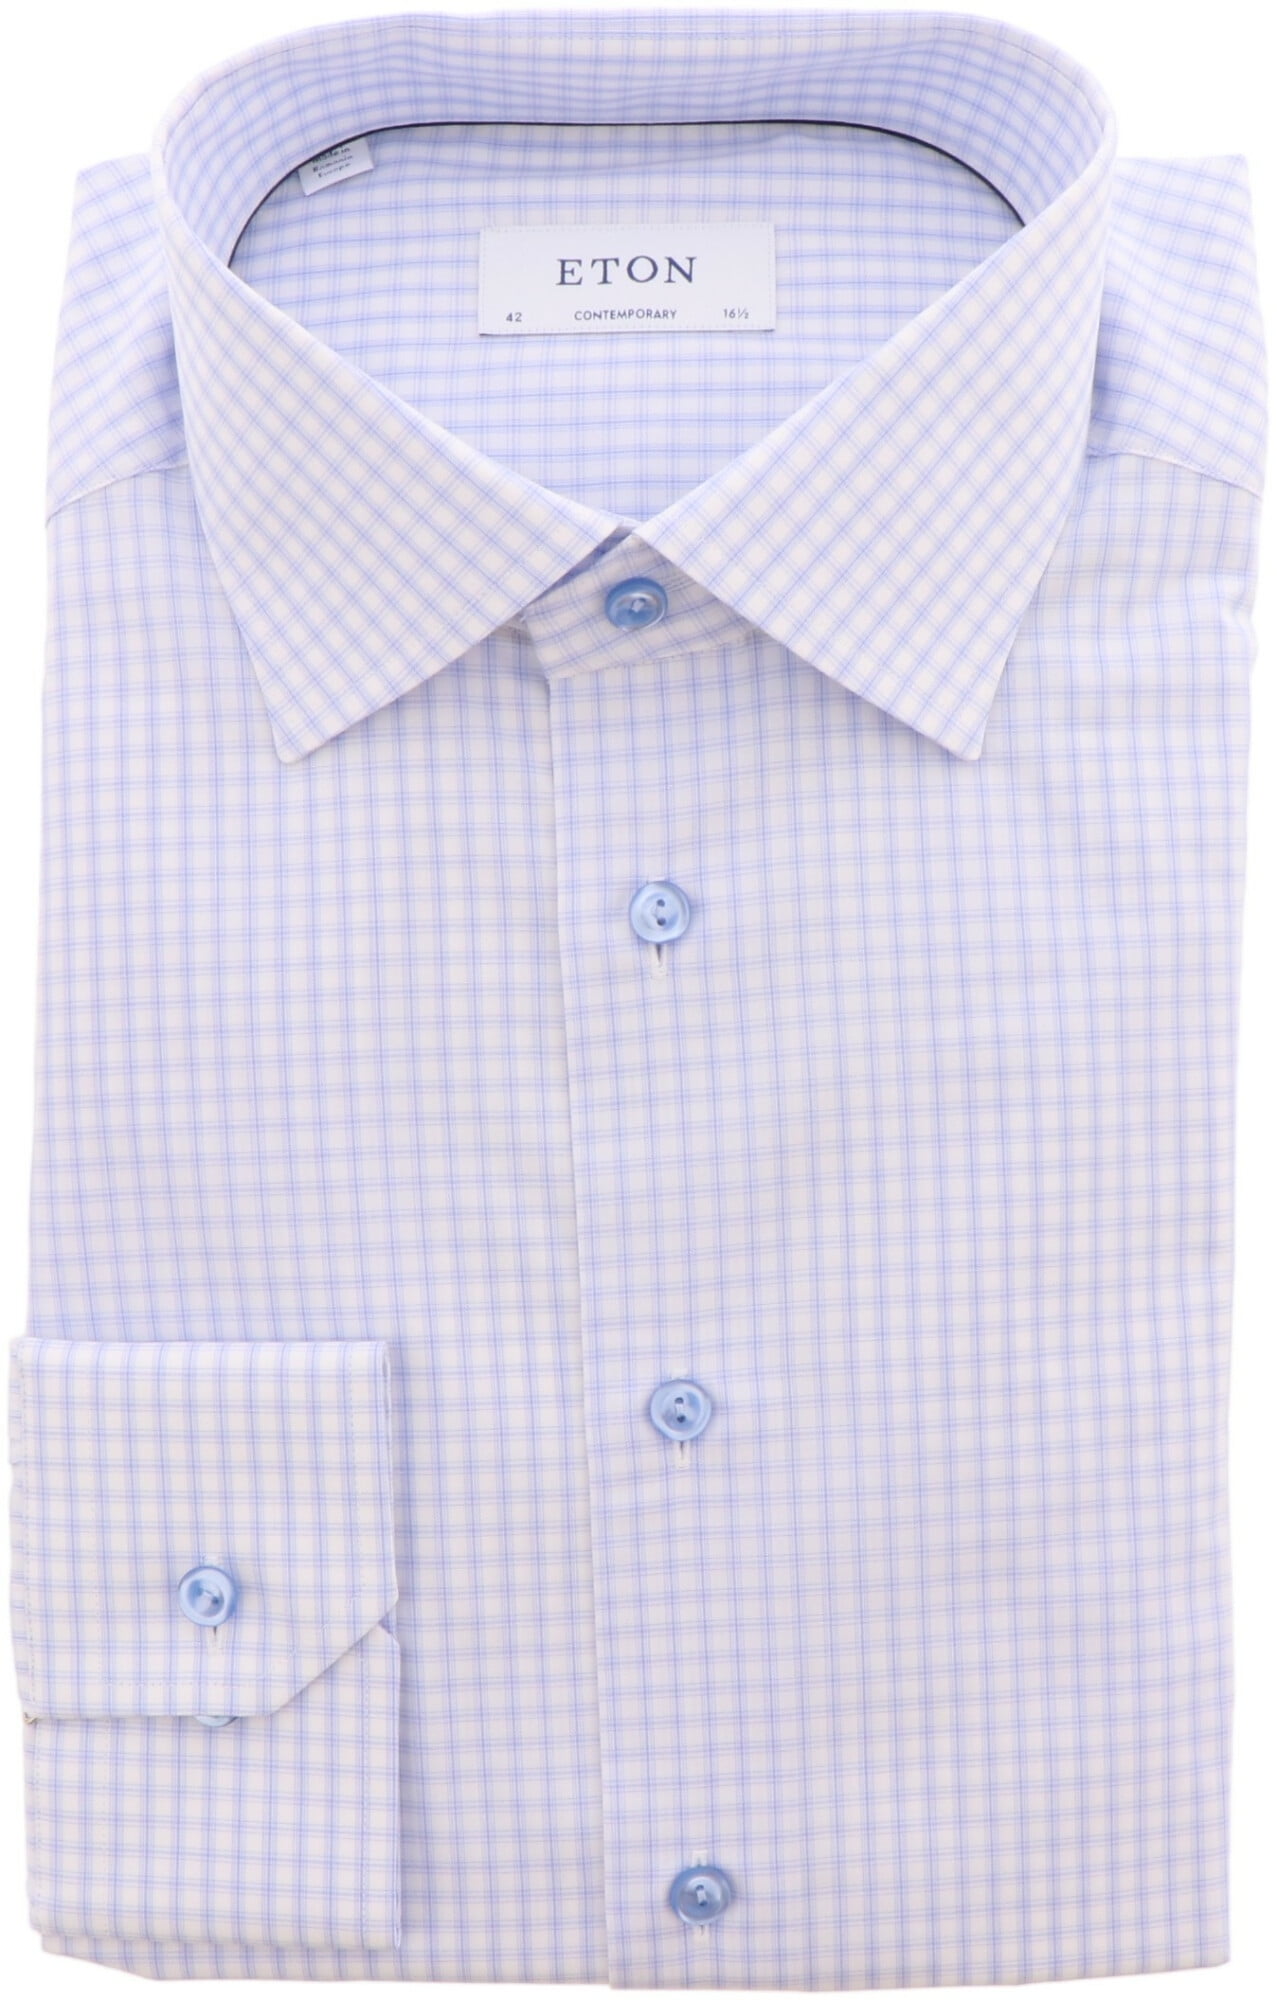 Eton Men's Blue And White Contemporary Fit Checked Dress Shirt Casual